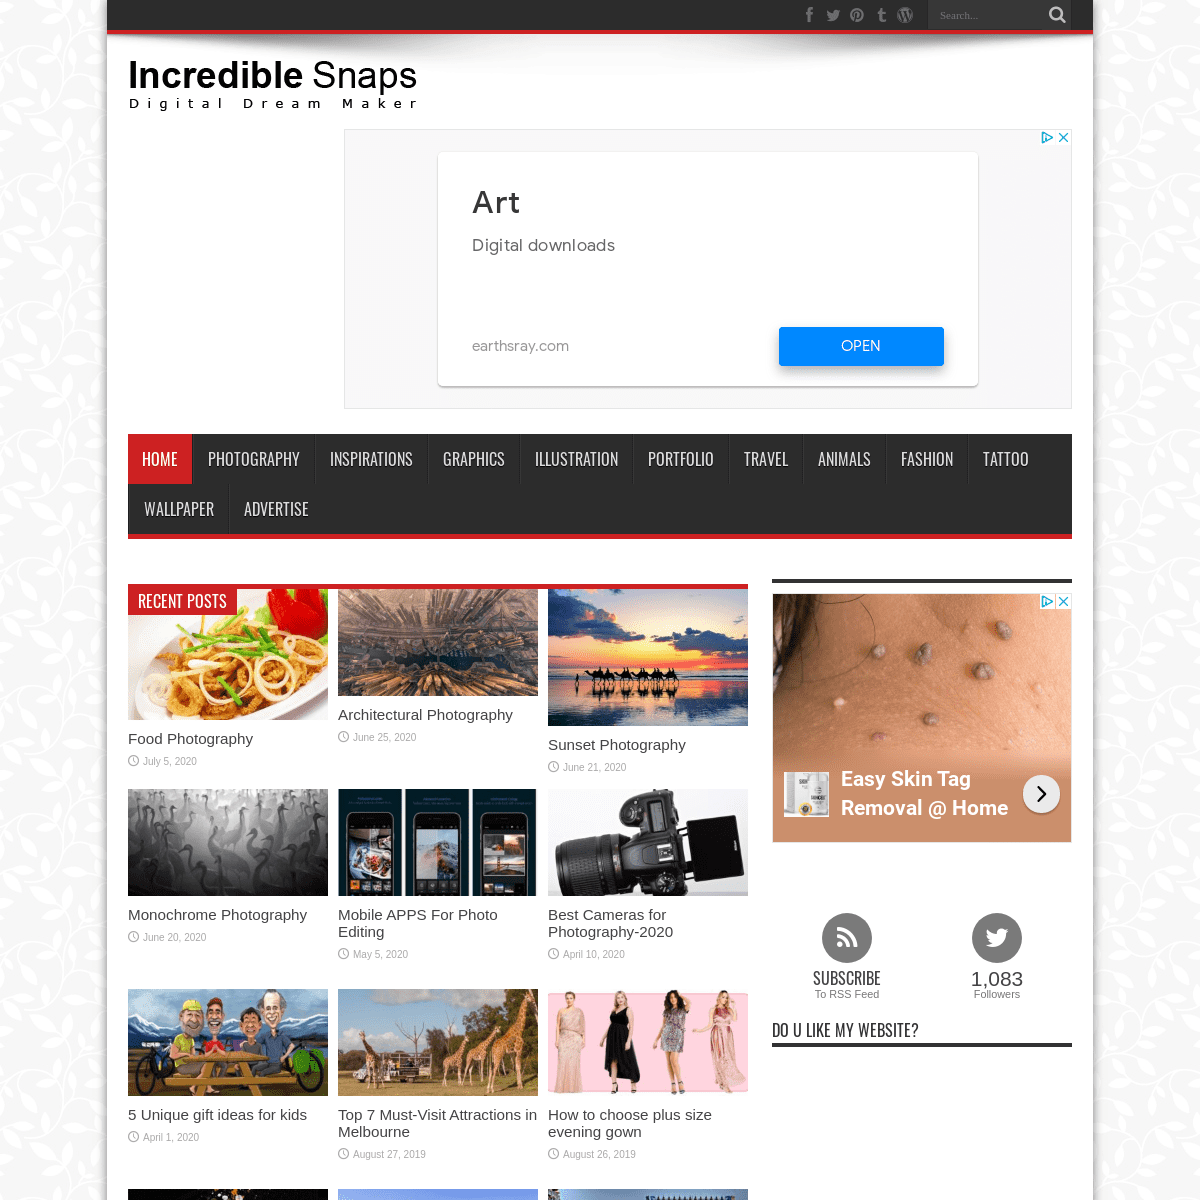 A complete backup of https://incrediblesnaps.com